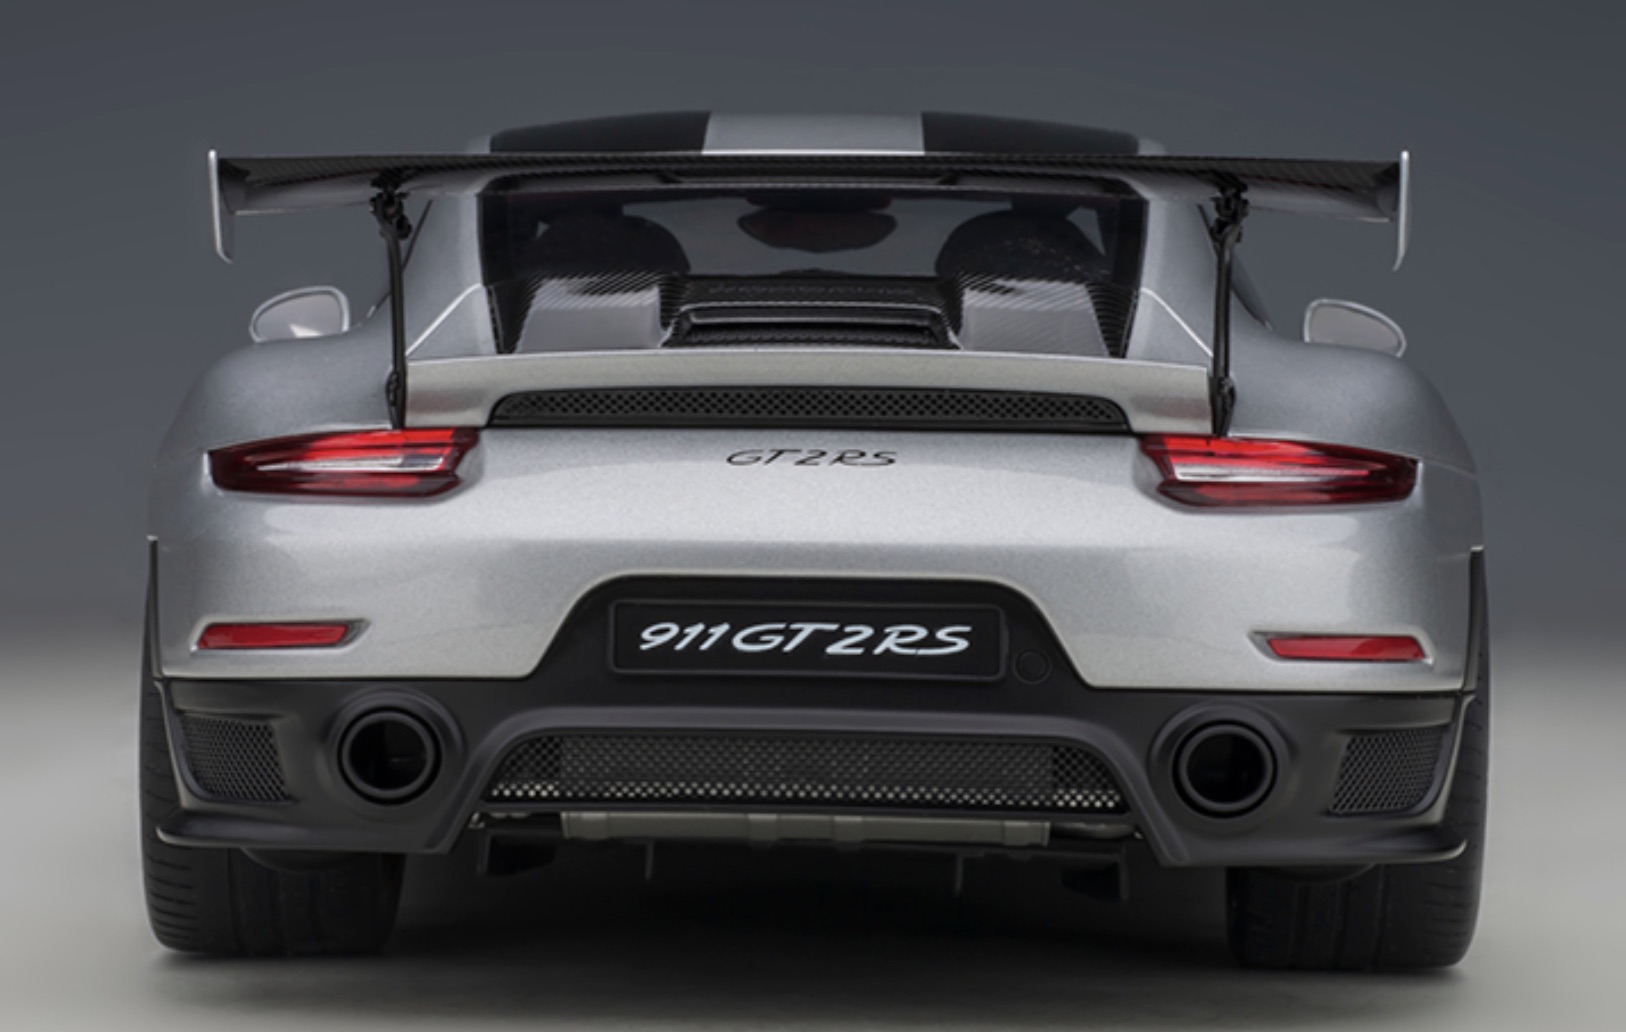 Porsche 911, 991, GT2 RS Scale Model - Image 7 of 7